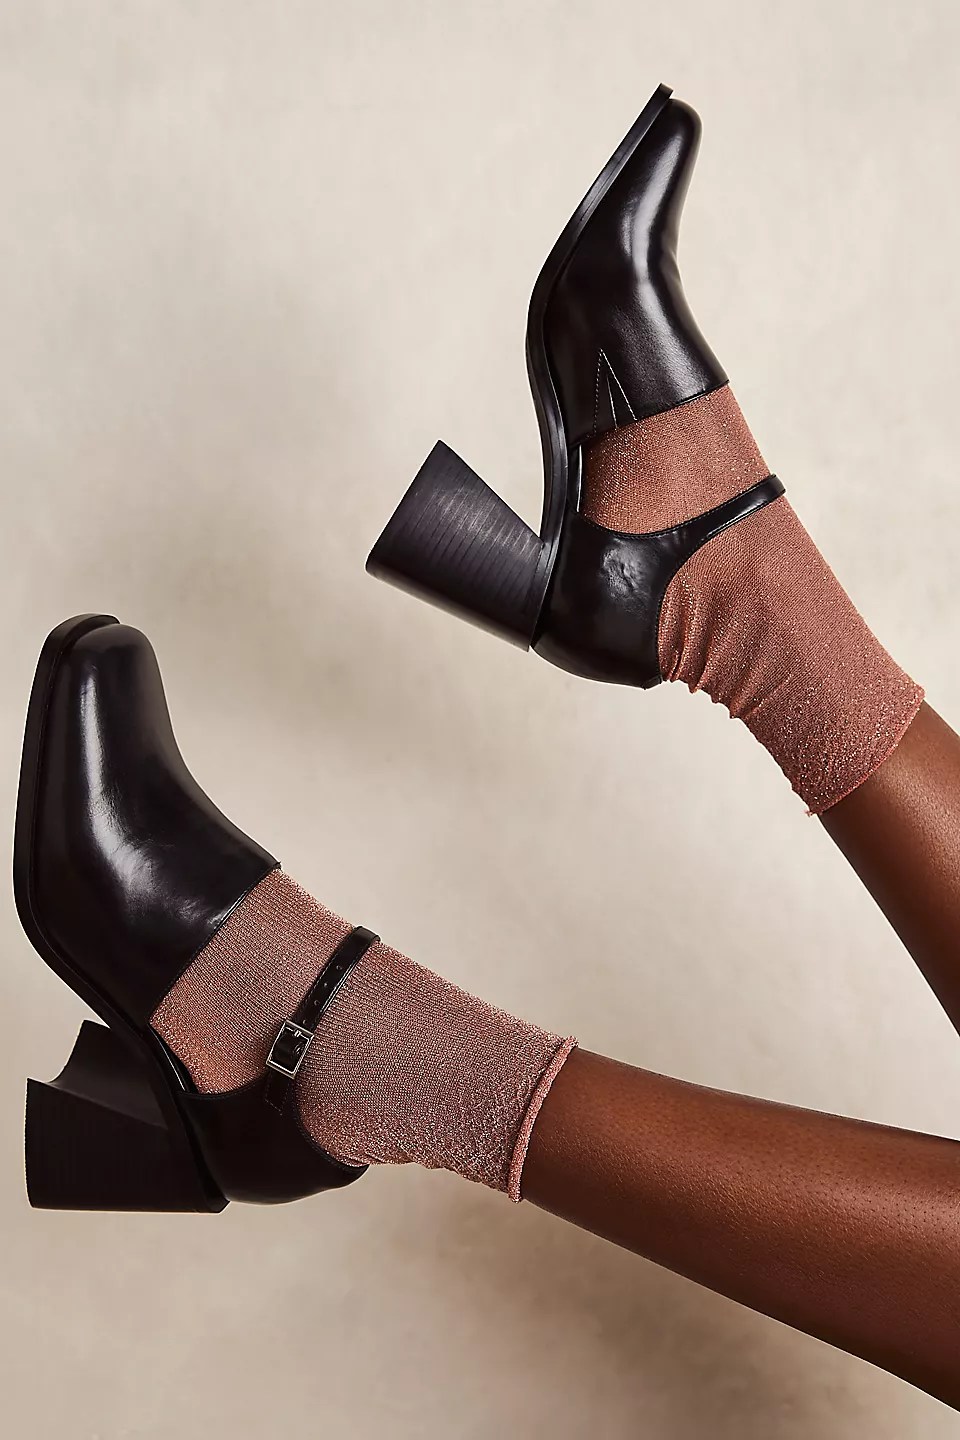 free people mary jane heels for holiday parties